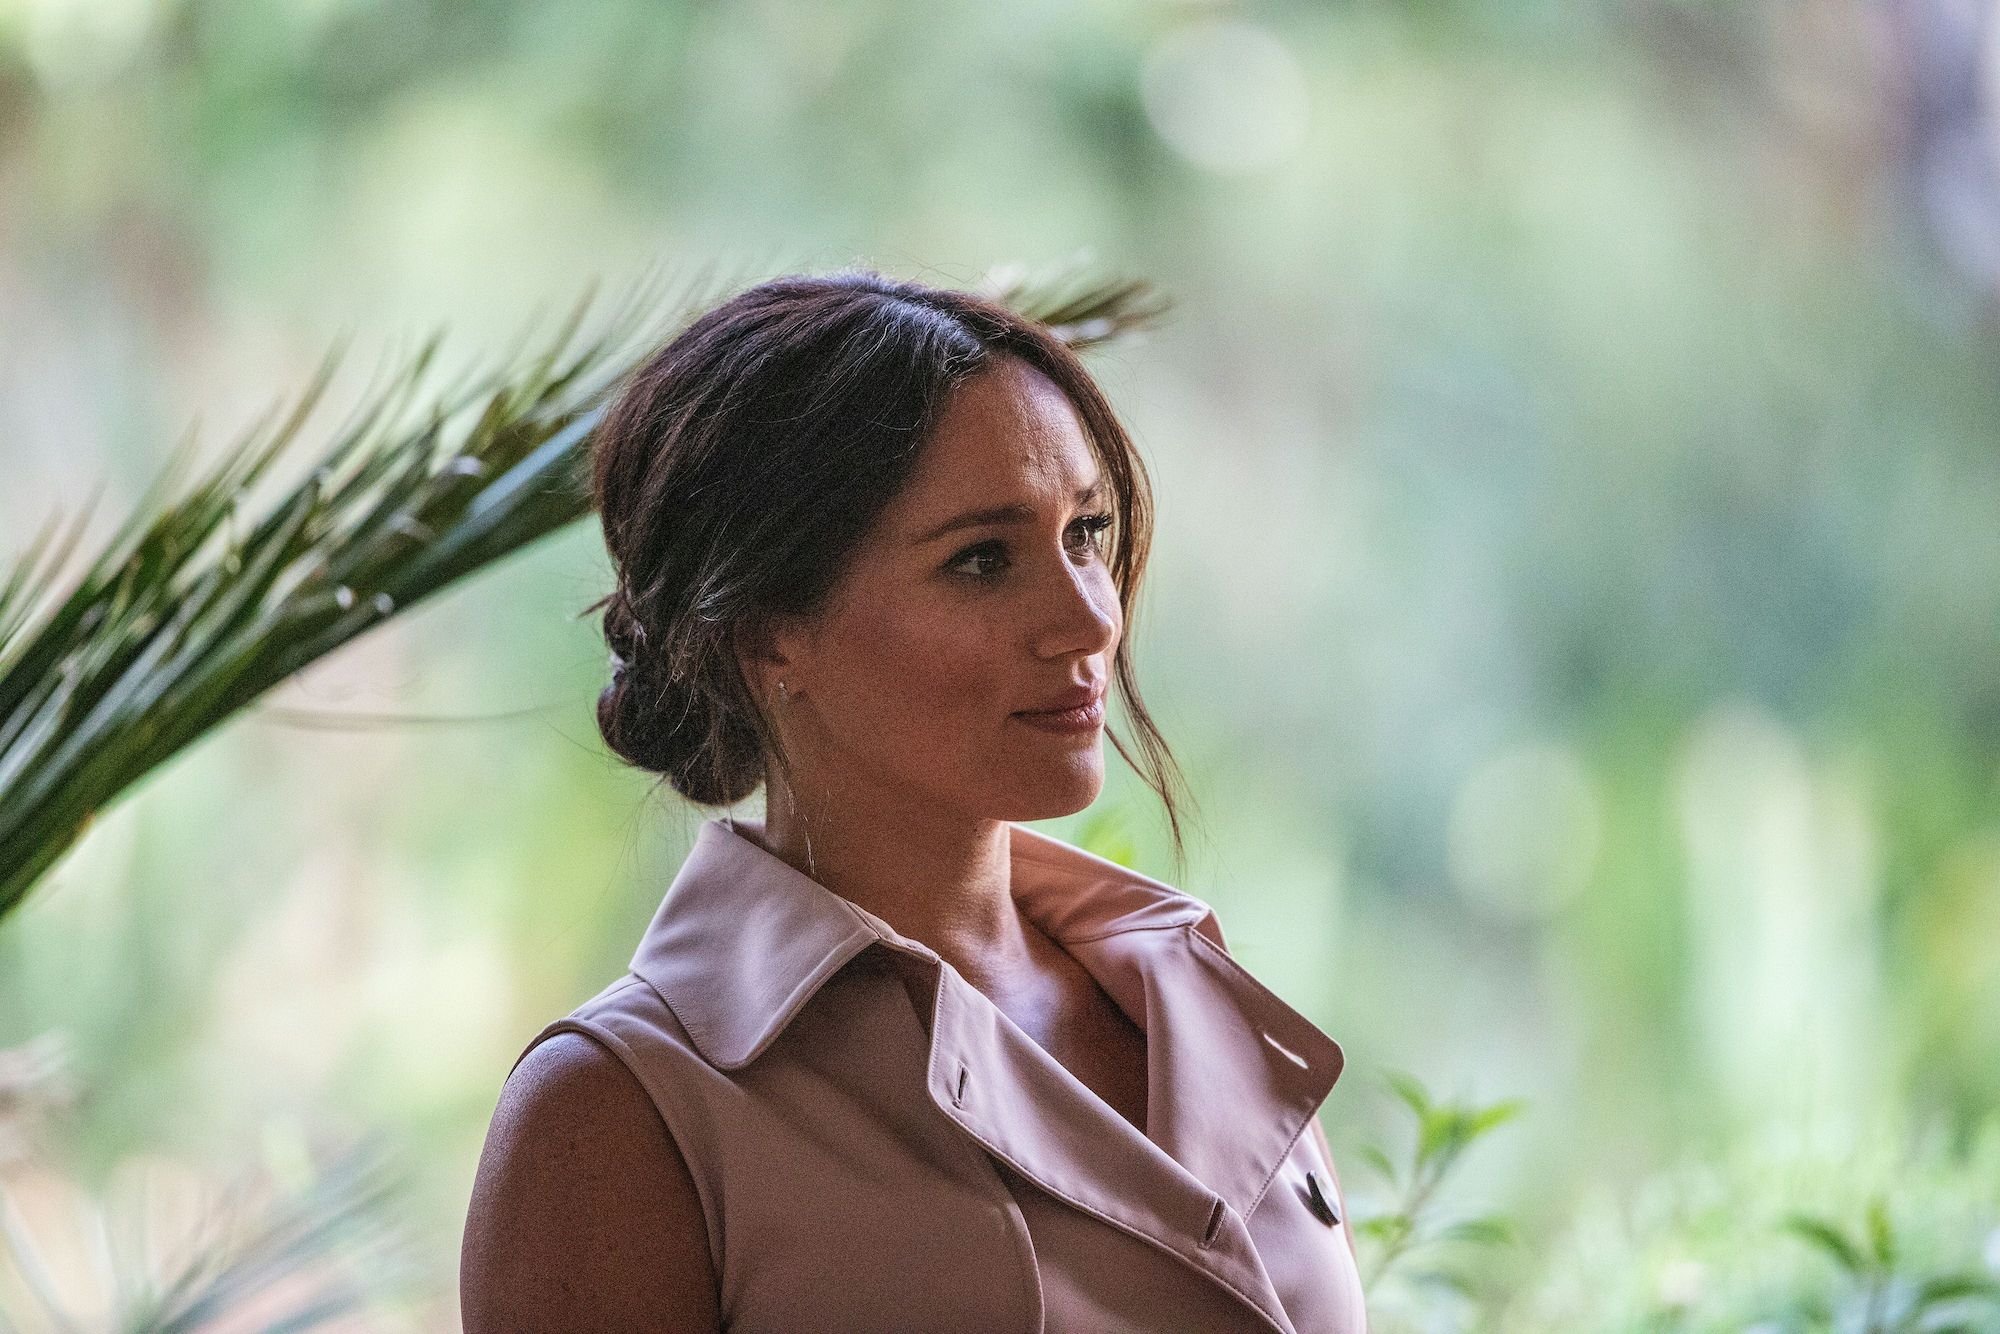 Meghan Markle looking off to the side in front of a blurred green background